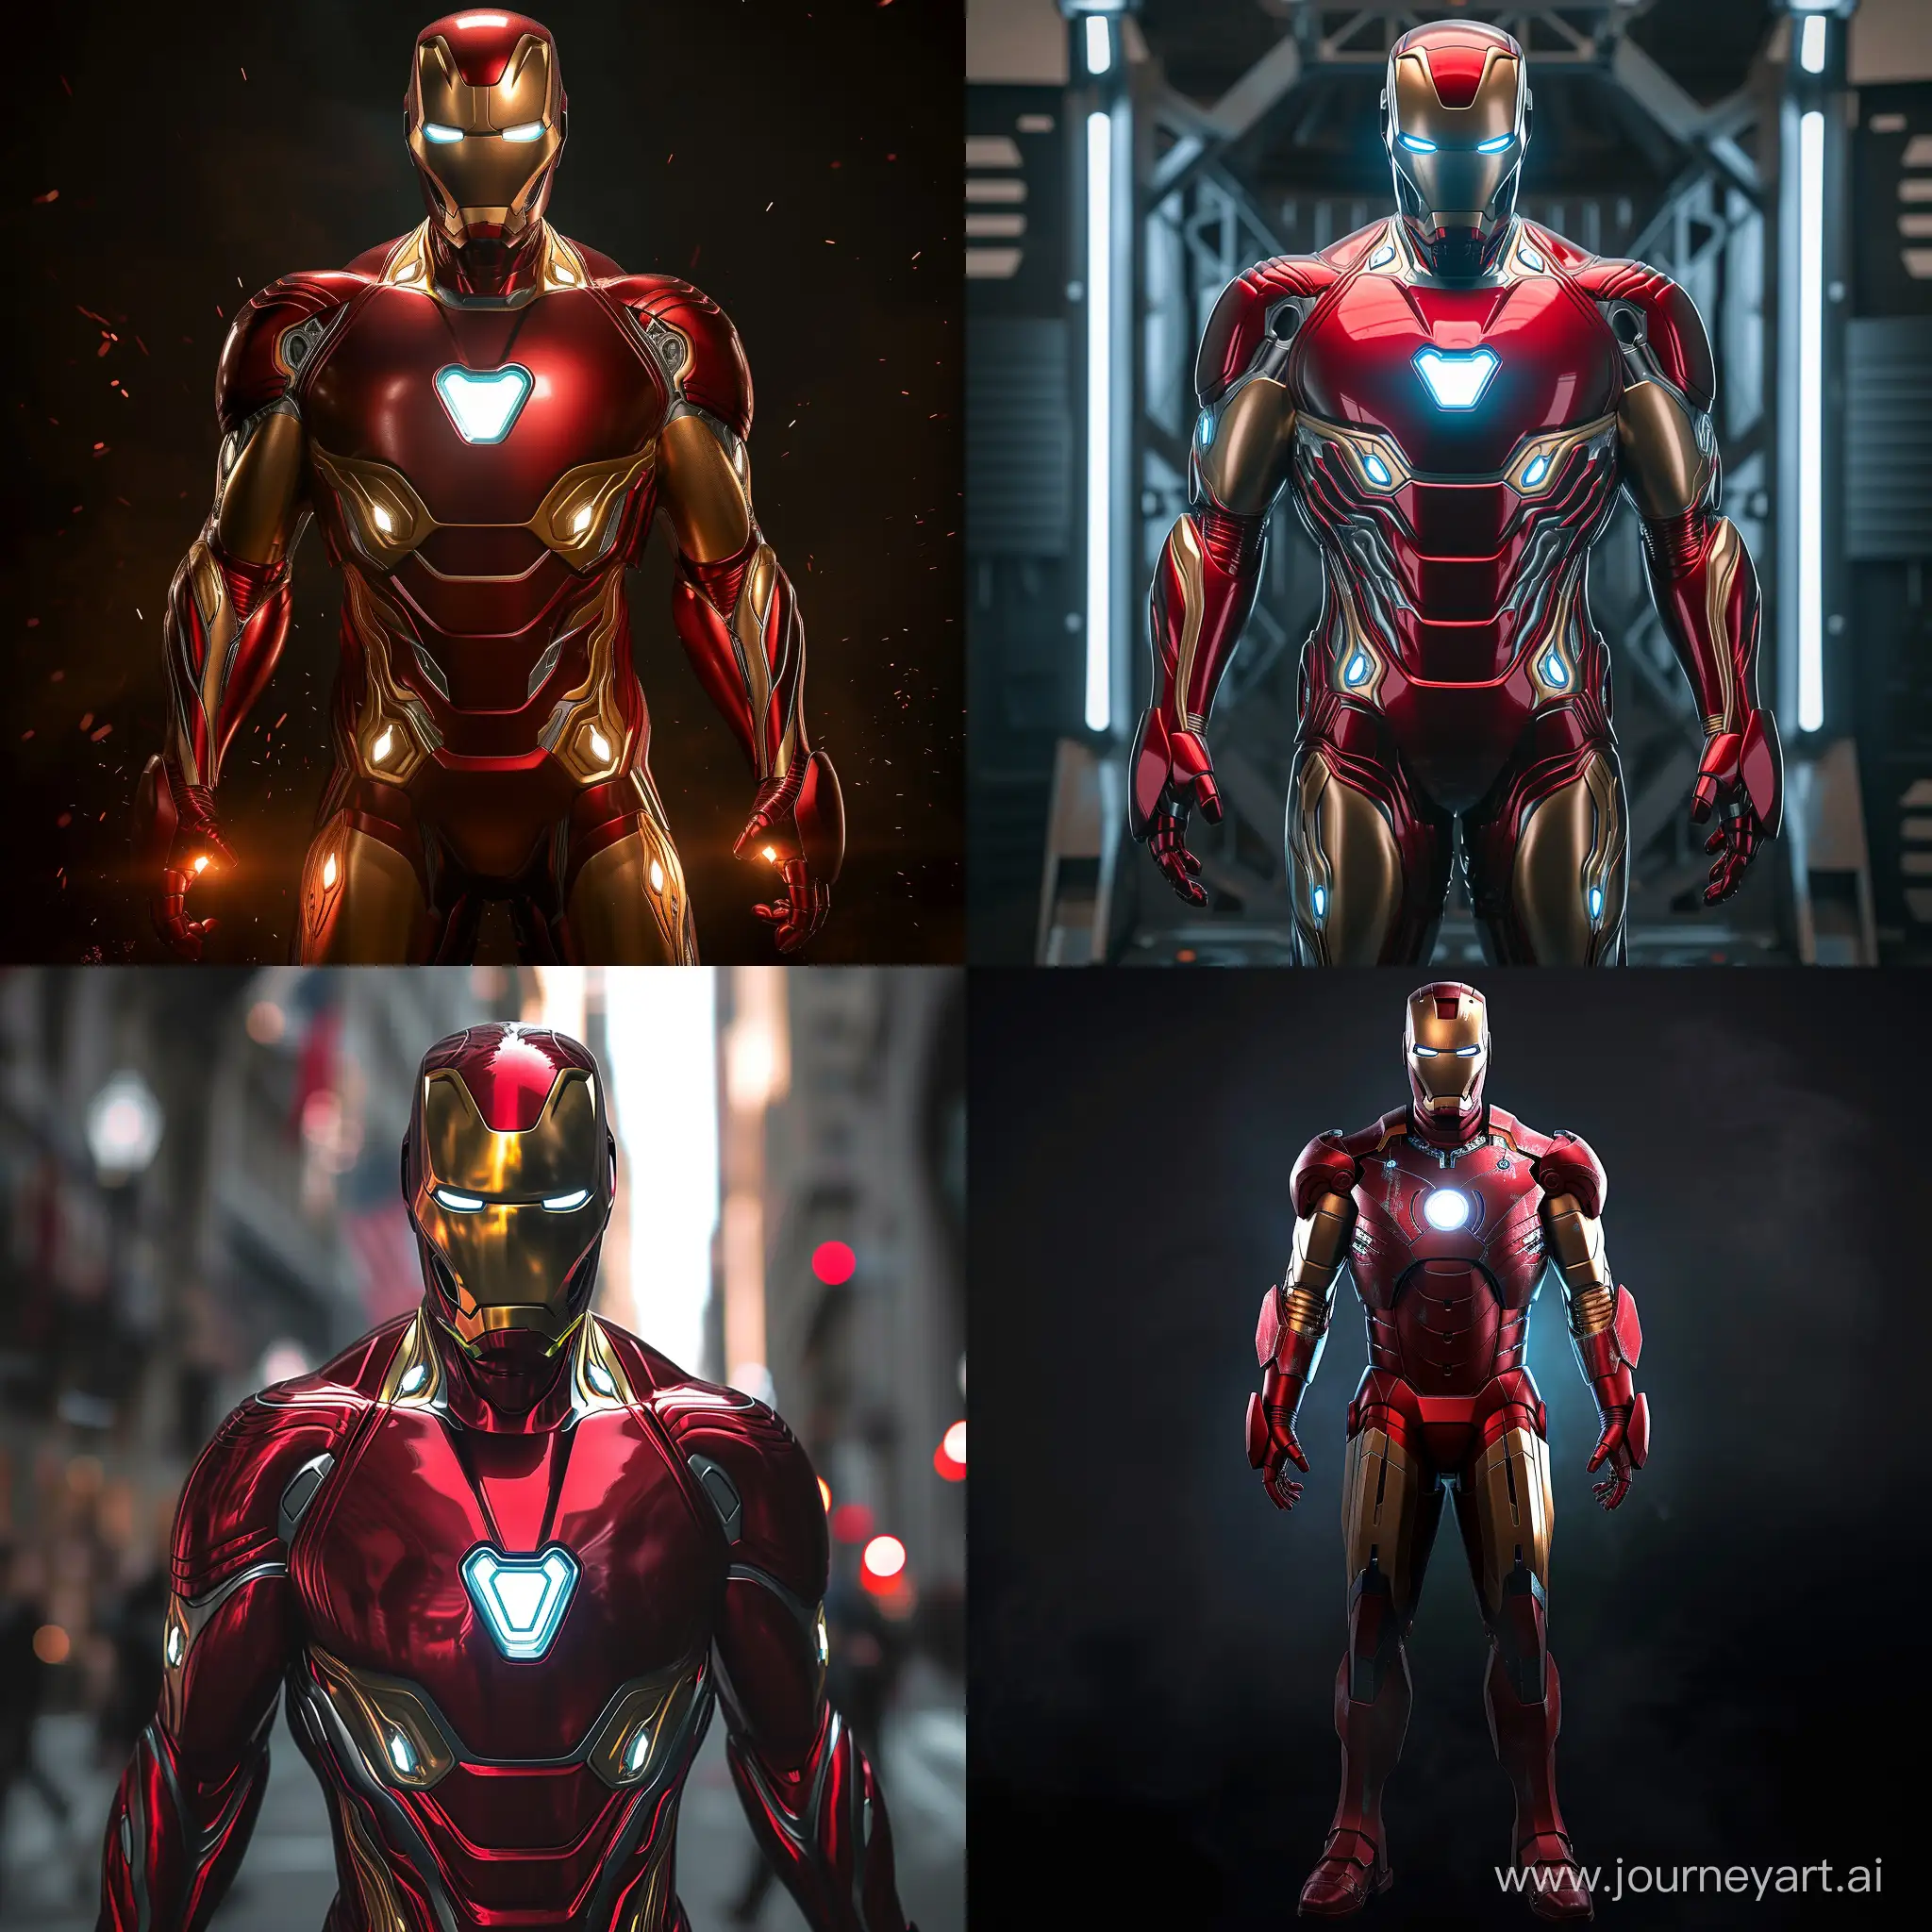 HighDefinition-4K-Image-of-Iron-Man-in-Full-Body-Sony-Exclusive